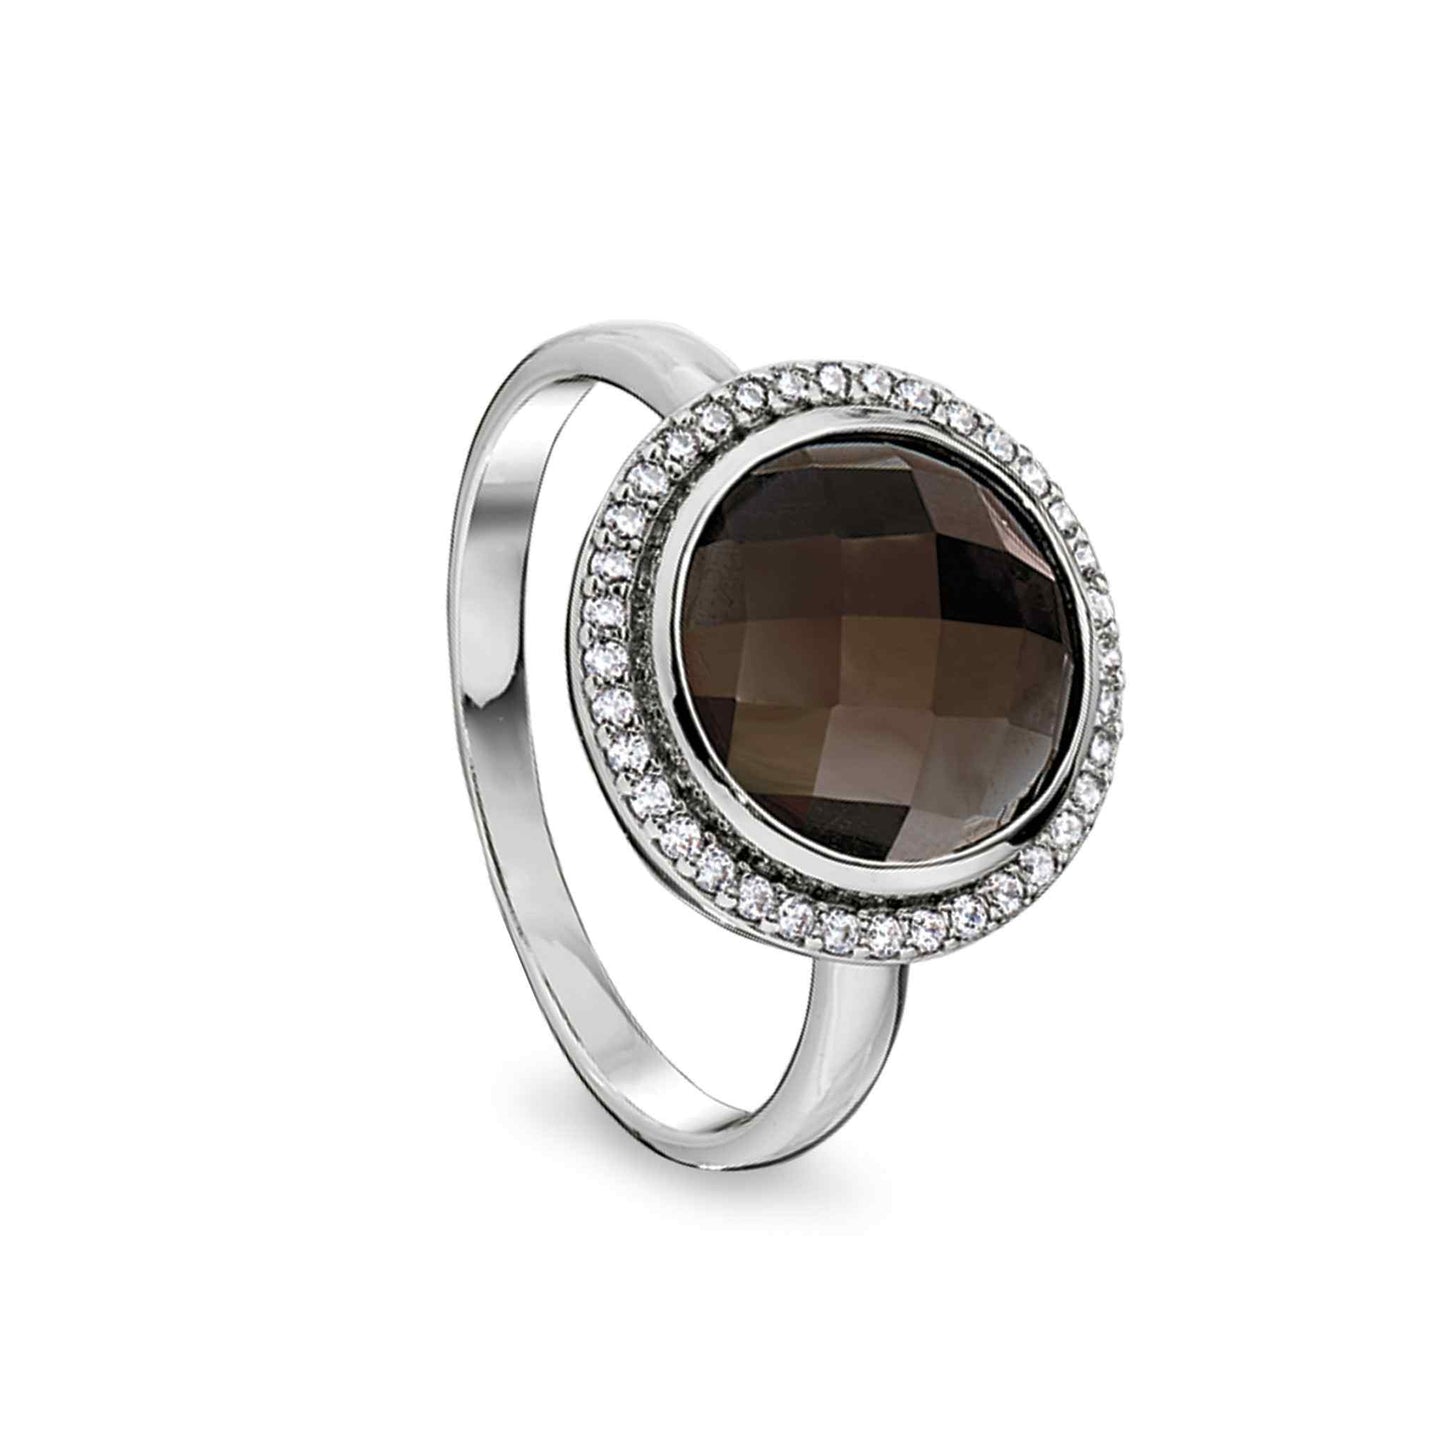 A facet cut smoky quartz ring with simulated diamonds displayed on a neutral white background.